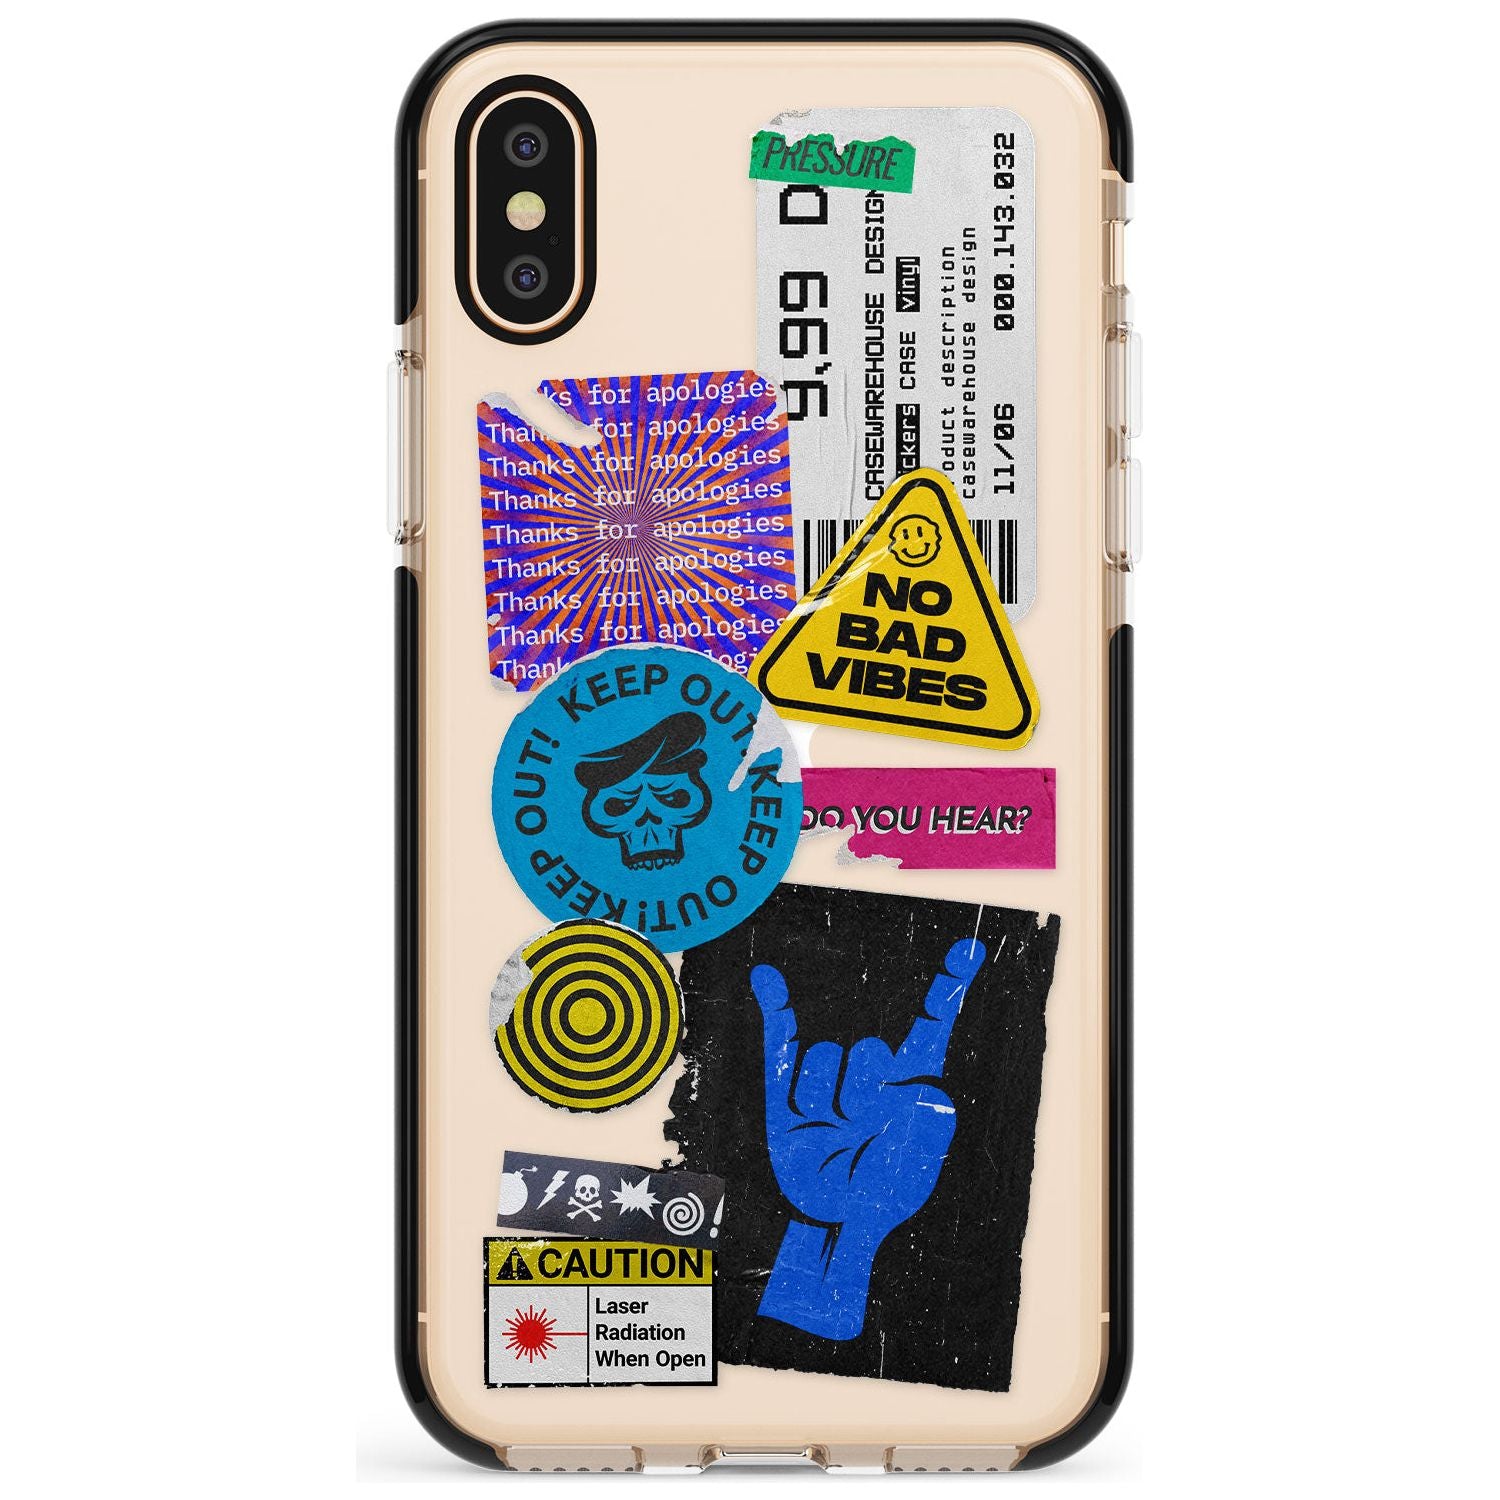 No Bad Vibes Sticker Mix Pink Fade Impact Phone Case for iPhone X XS Max XR